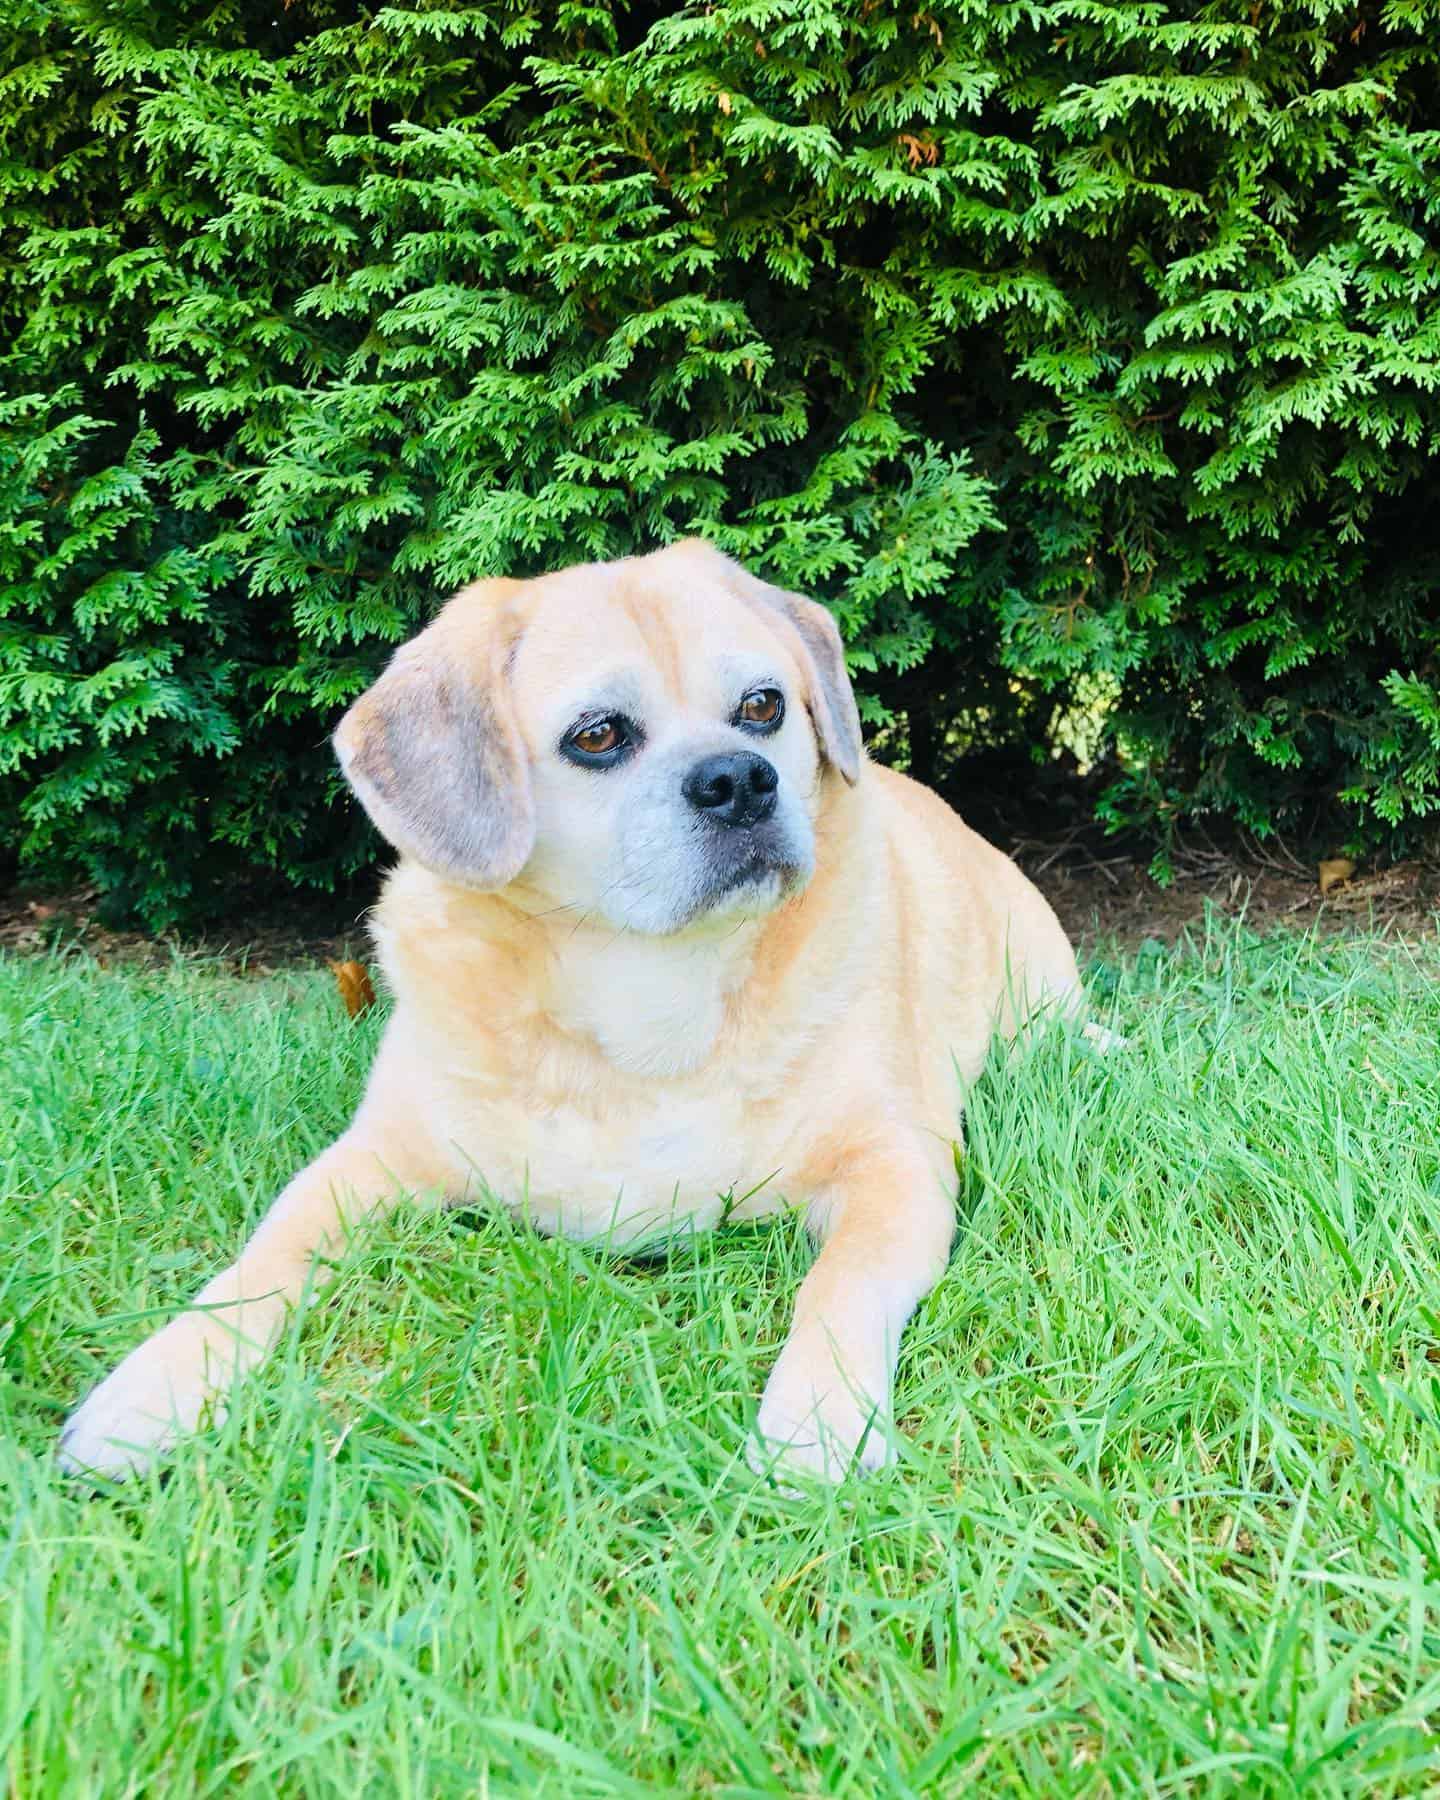 Puggle on the grass